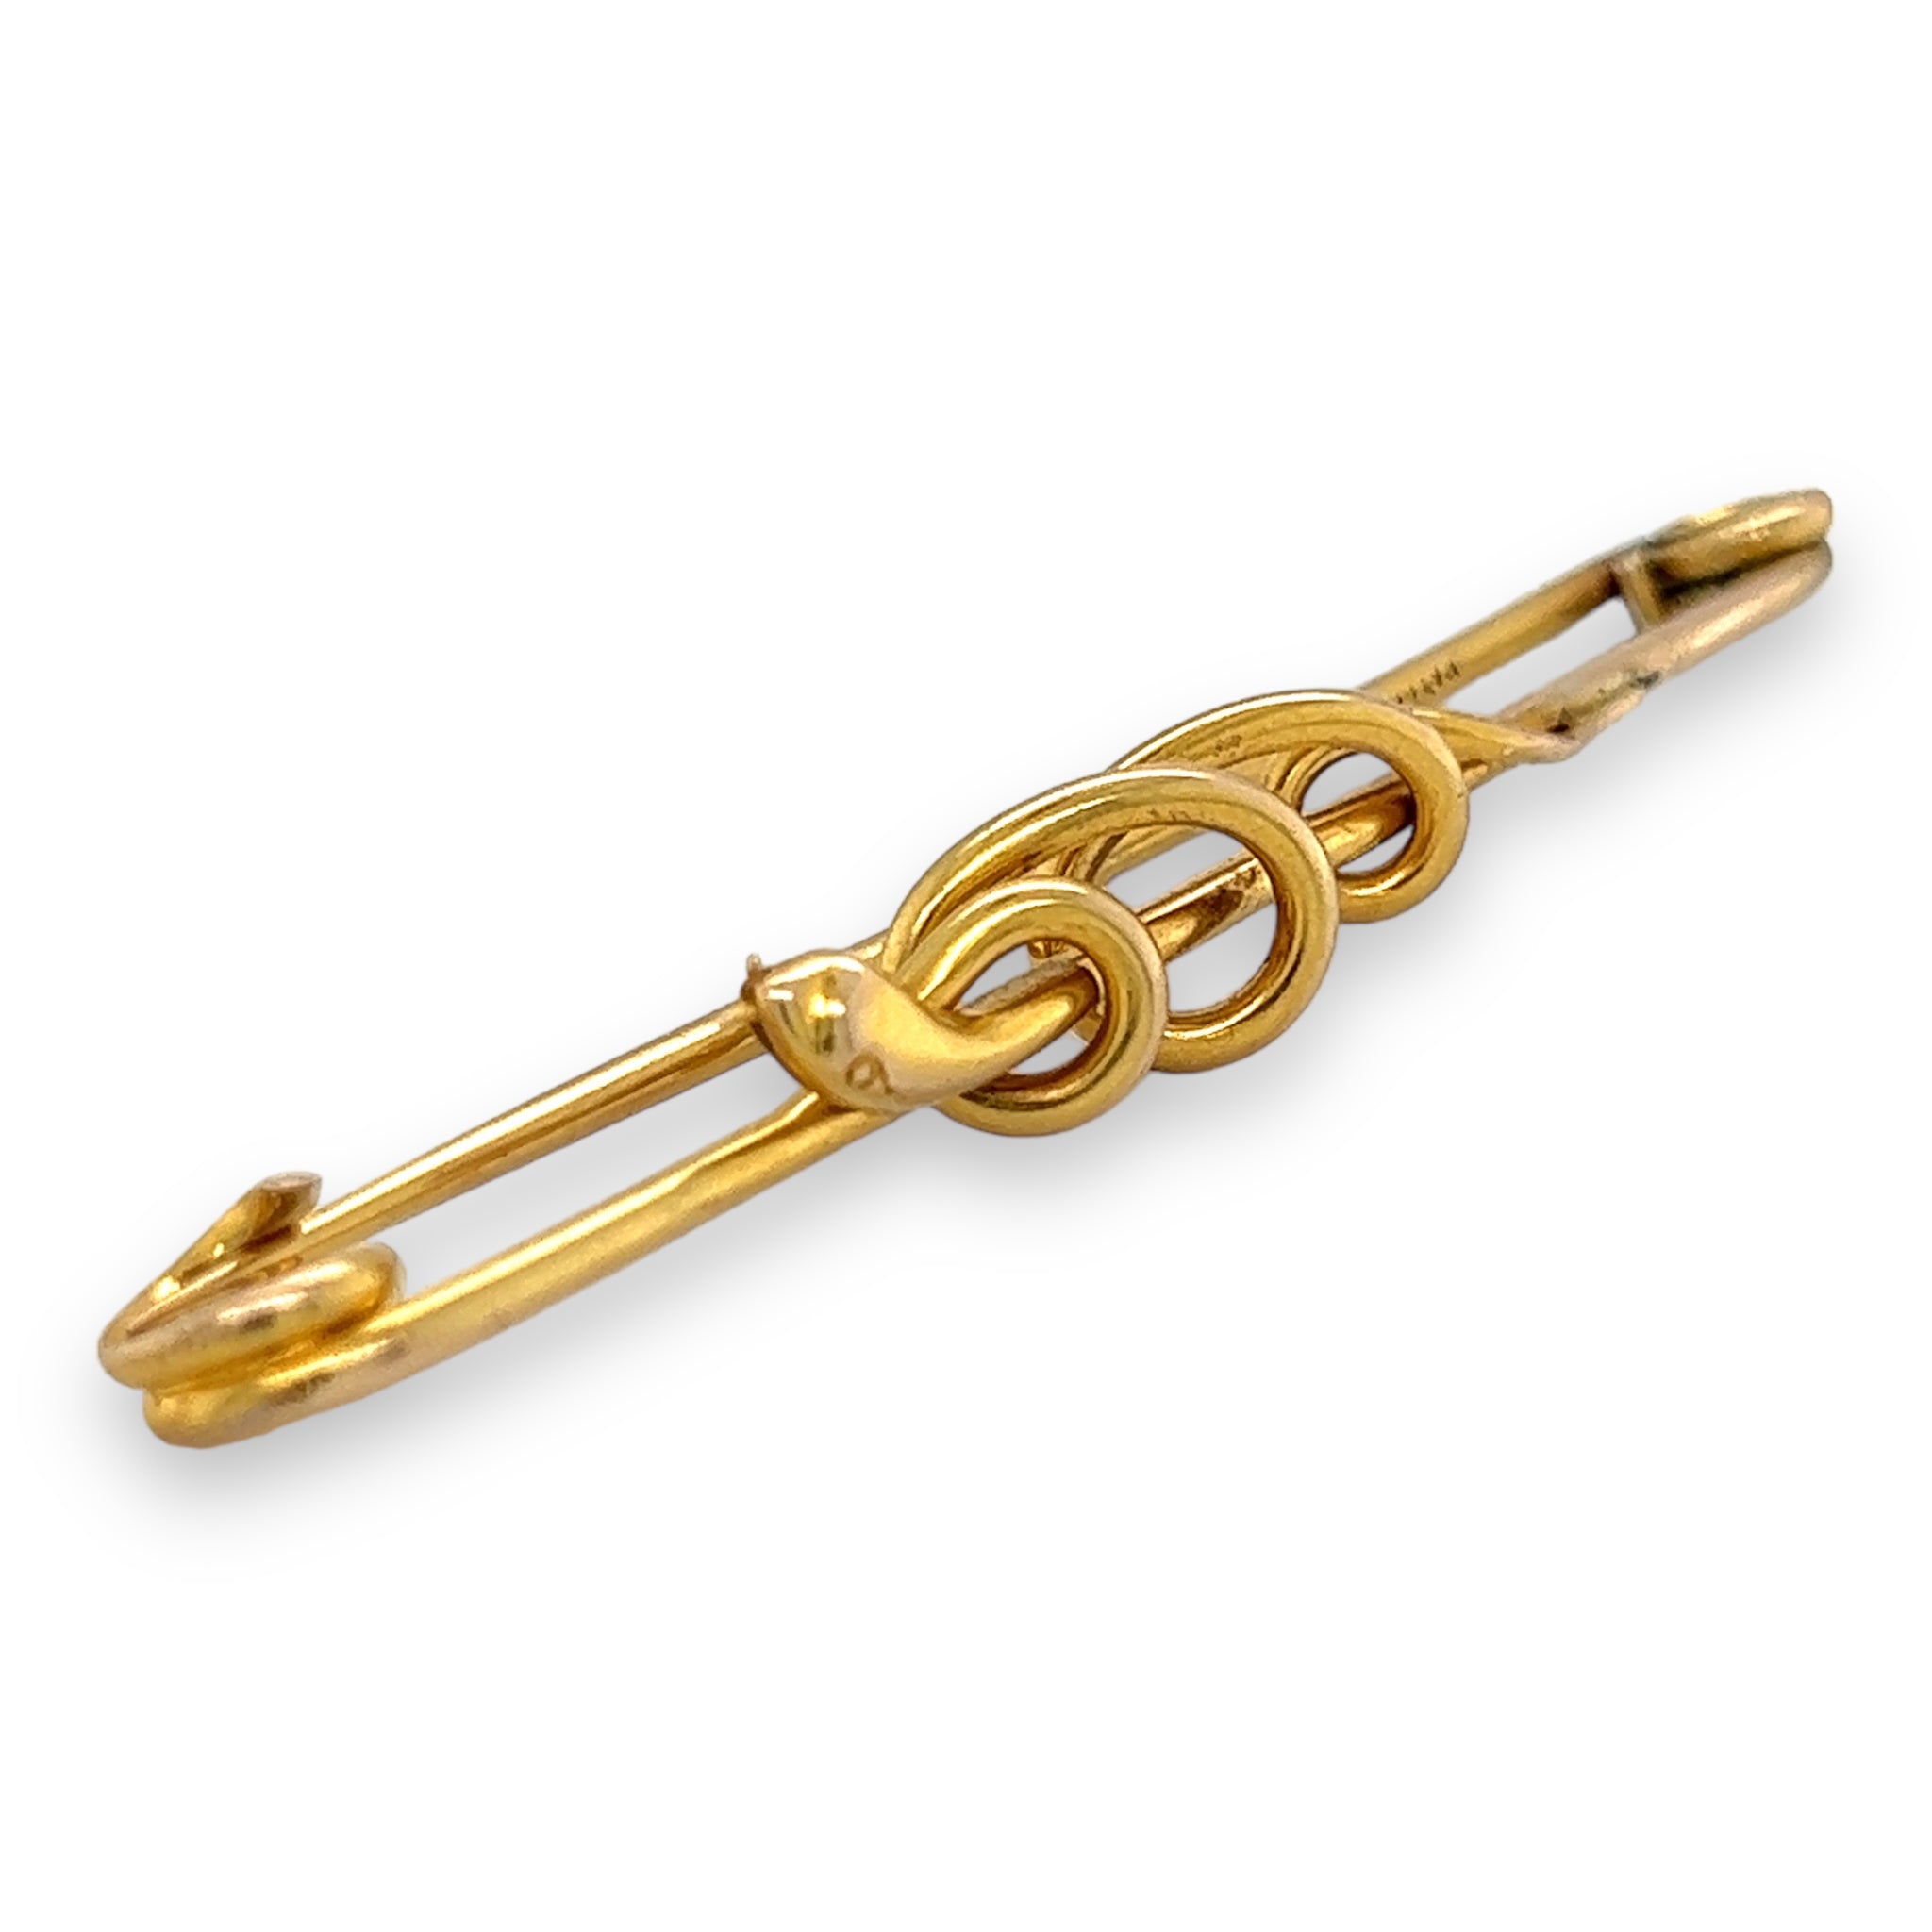 Late Victorian 15ct Gold and Garnet Tie Pin | Parkin and Gerrish | Antique and Vintage Jewellery